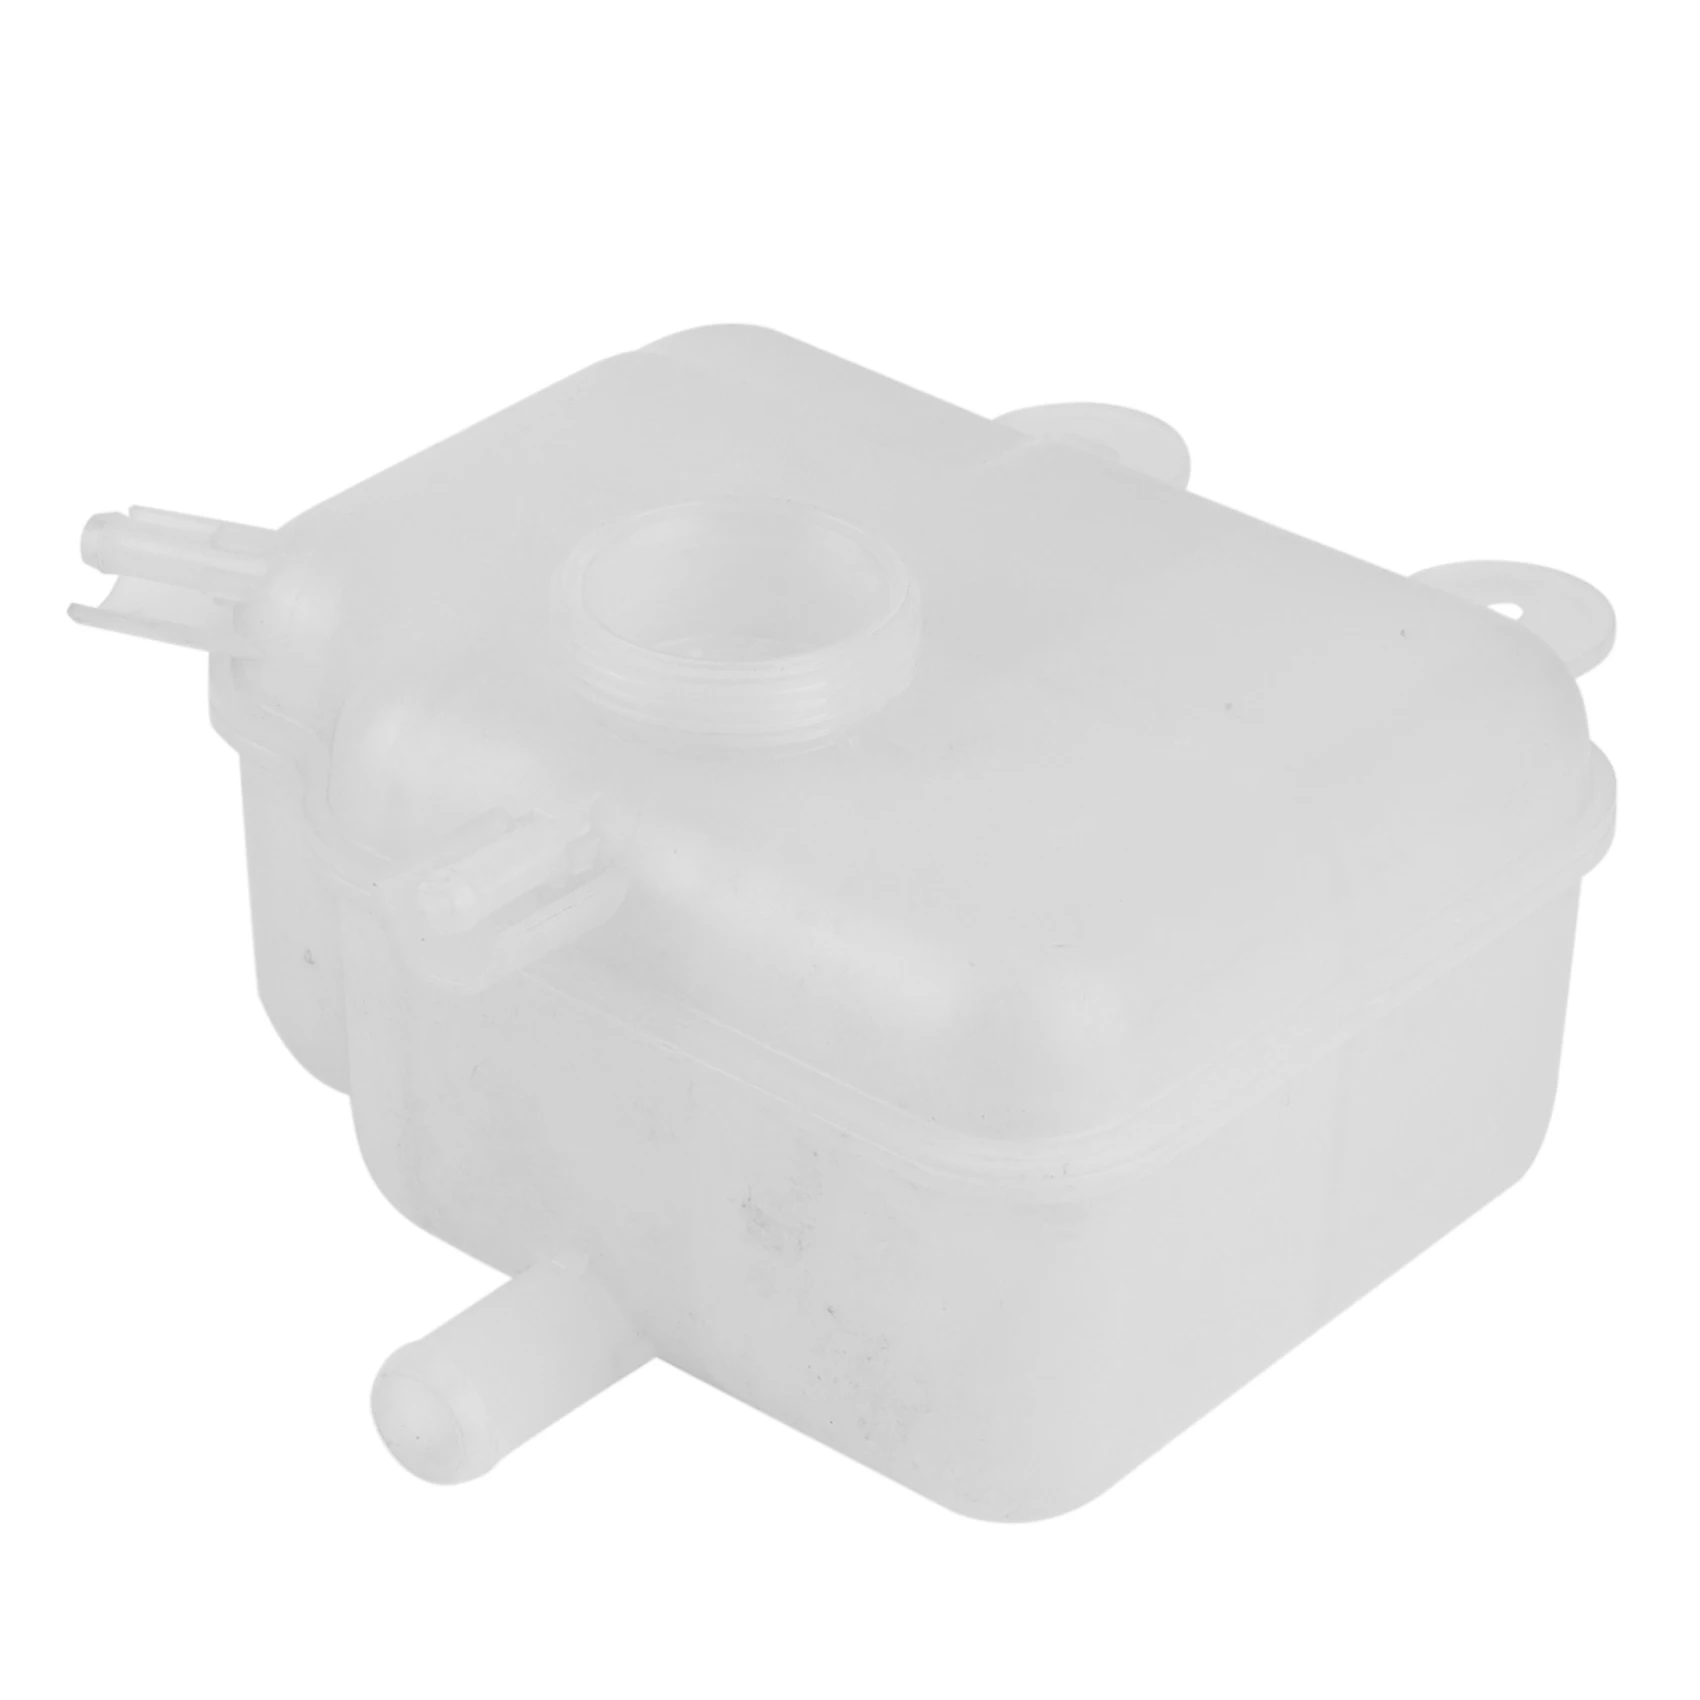 GM Surge Tank for Chevrolet Sail 1.5L 90922457 Water Tanks with Kettle, Coolant, Antifreeze and